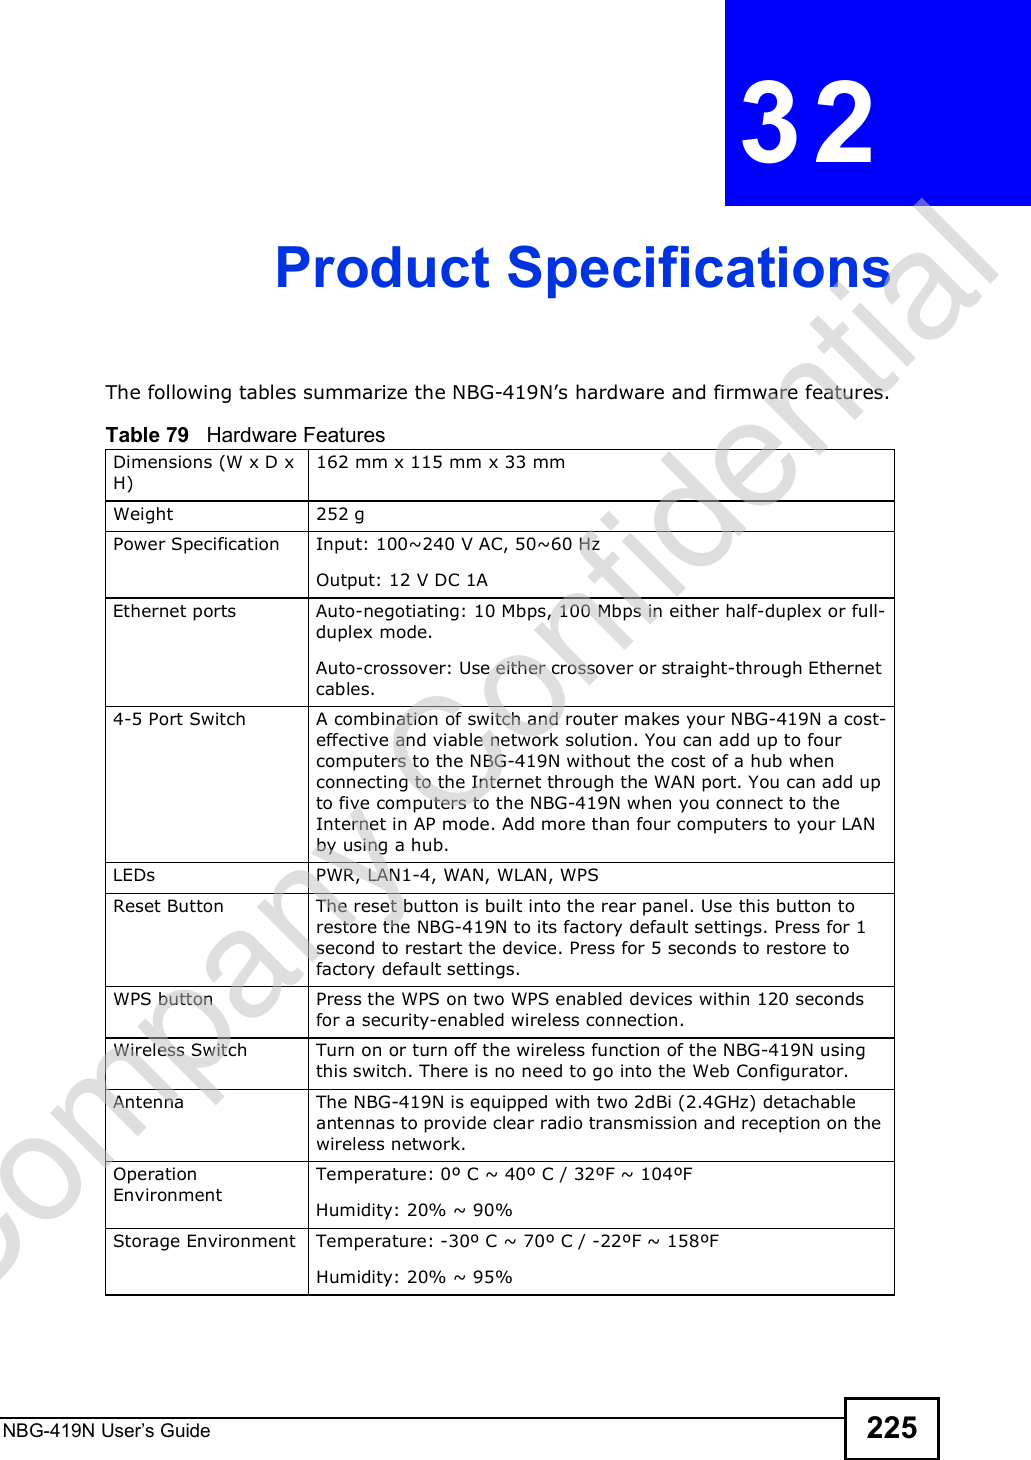 NBG-419N User s Guide 225CHAPTER  32 Product SpecificationsThe following tables summarize the NBG-419N!s hardware and firmware features.Table 79   Hardware FeaturesDimensions (W x D x H) 162 mm x 115 mm x 33 mmWeight 252 gPower Specification Input: 100~240 V AC, 50~60 HzOutput: 12 V DC 1AEthernet portsAuto-negotiating: 10 Mbps, 100 Mbps in either half-duplex or full-duplex mode.Auto-crossover: Use either crossover or straight-through Ethernet cables.4-5 Port Switch A combination of switch and router makes your NBG-419N a cost-effective and viable network solution. You can add up to four computers to the NBG-419N without the cost of a hub when connecting to the Internet through the WAN port. You can add up to five computers to the NBG-419N when you connect to the Internet in AP mode. Add more than four computers to your LAN by using a hub.LEDsPWR, LAN1-4, WAN, WLAN, WPSReset Button The reset button is built into the rear panel. Use this button to restore the NBG-419N to its factory default settings. Press for 1 second to restart the device. Press for 5 seconds to restore to factory default settings.WPS button Press the WPS on two WPS enabled devices within 120 seconds for a security-enabled wireless connection.Wireless Switch Turn on or turn off the wireless function of the NBG-419N using this switch. There is no need to go into the Web Configurator. Antenna The NBG-419N is equipped with two 2dBi (2.4GHz) detachable antennas to provide clear radio transmission and reception on the wireless network. Operation EnvironmentTemperature: 0º C ~ 40º C / 32ºF ~ 104ºFHumidity: 20% ~ 90% Storage Environment Temperature: -30º C ~ 70º C / -22ºF ~ 158ºFHumidity: 20% ~ 95% Company Confidential